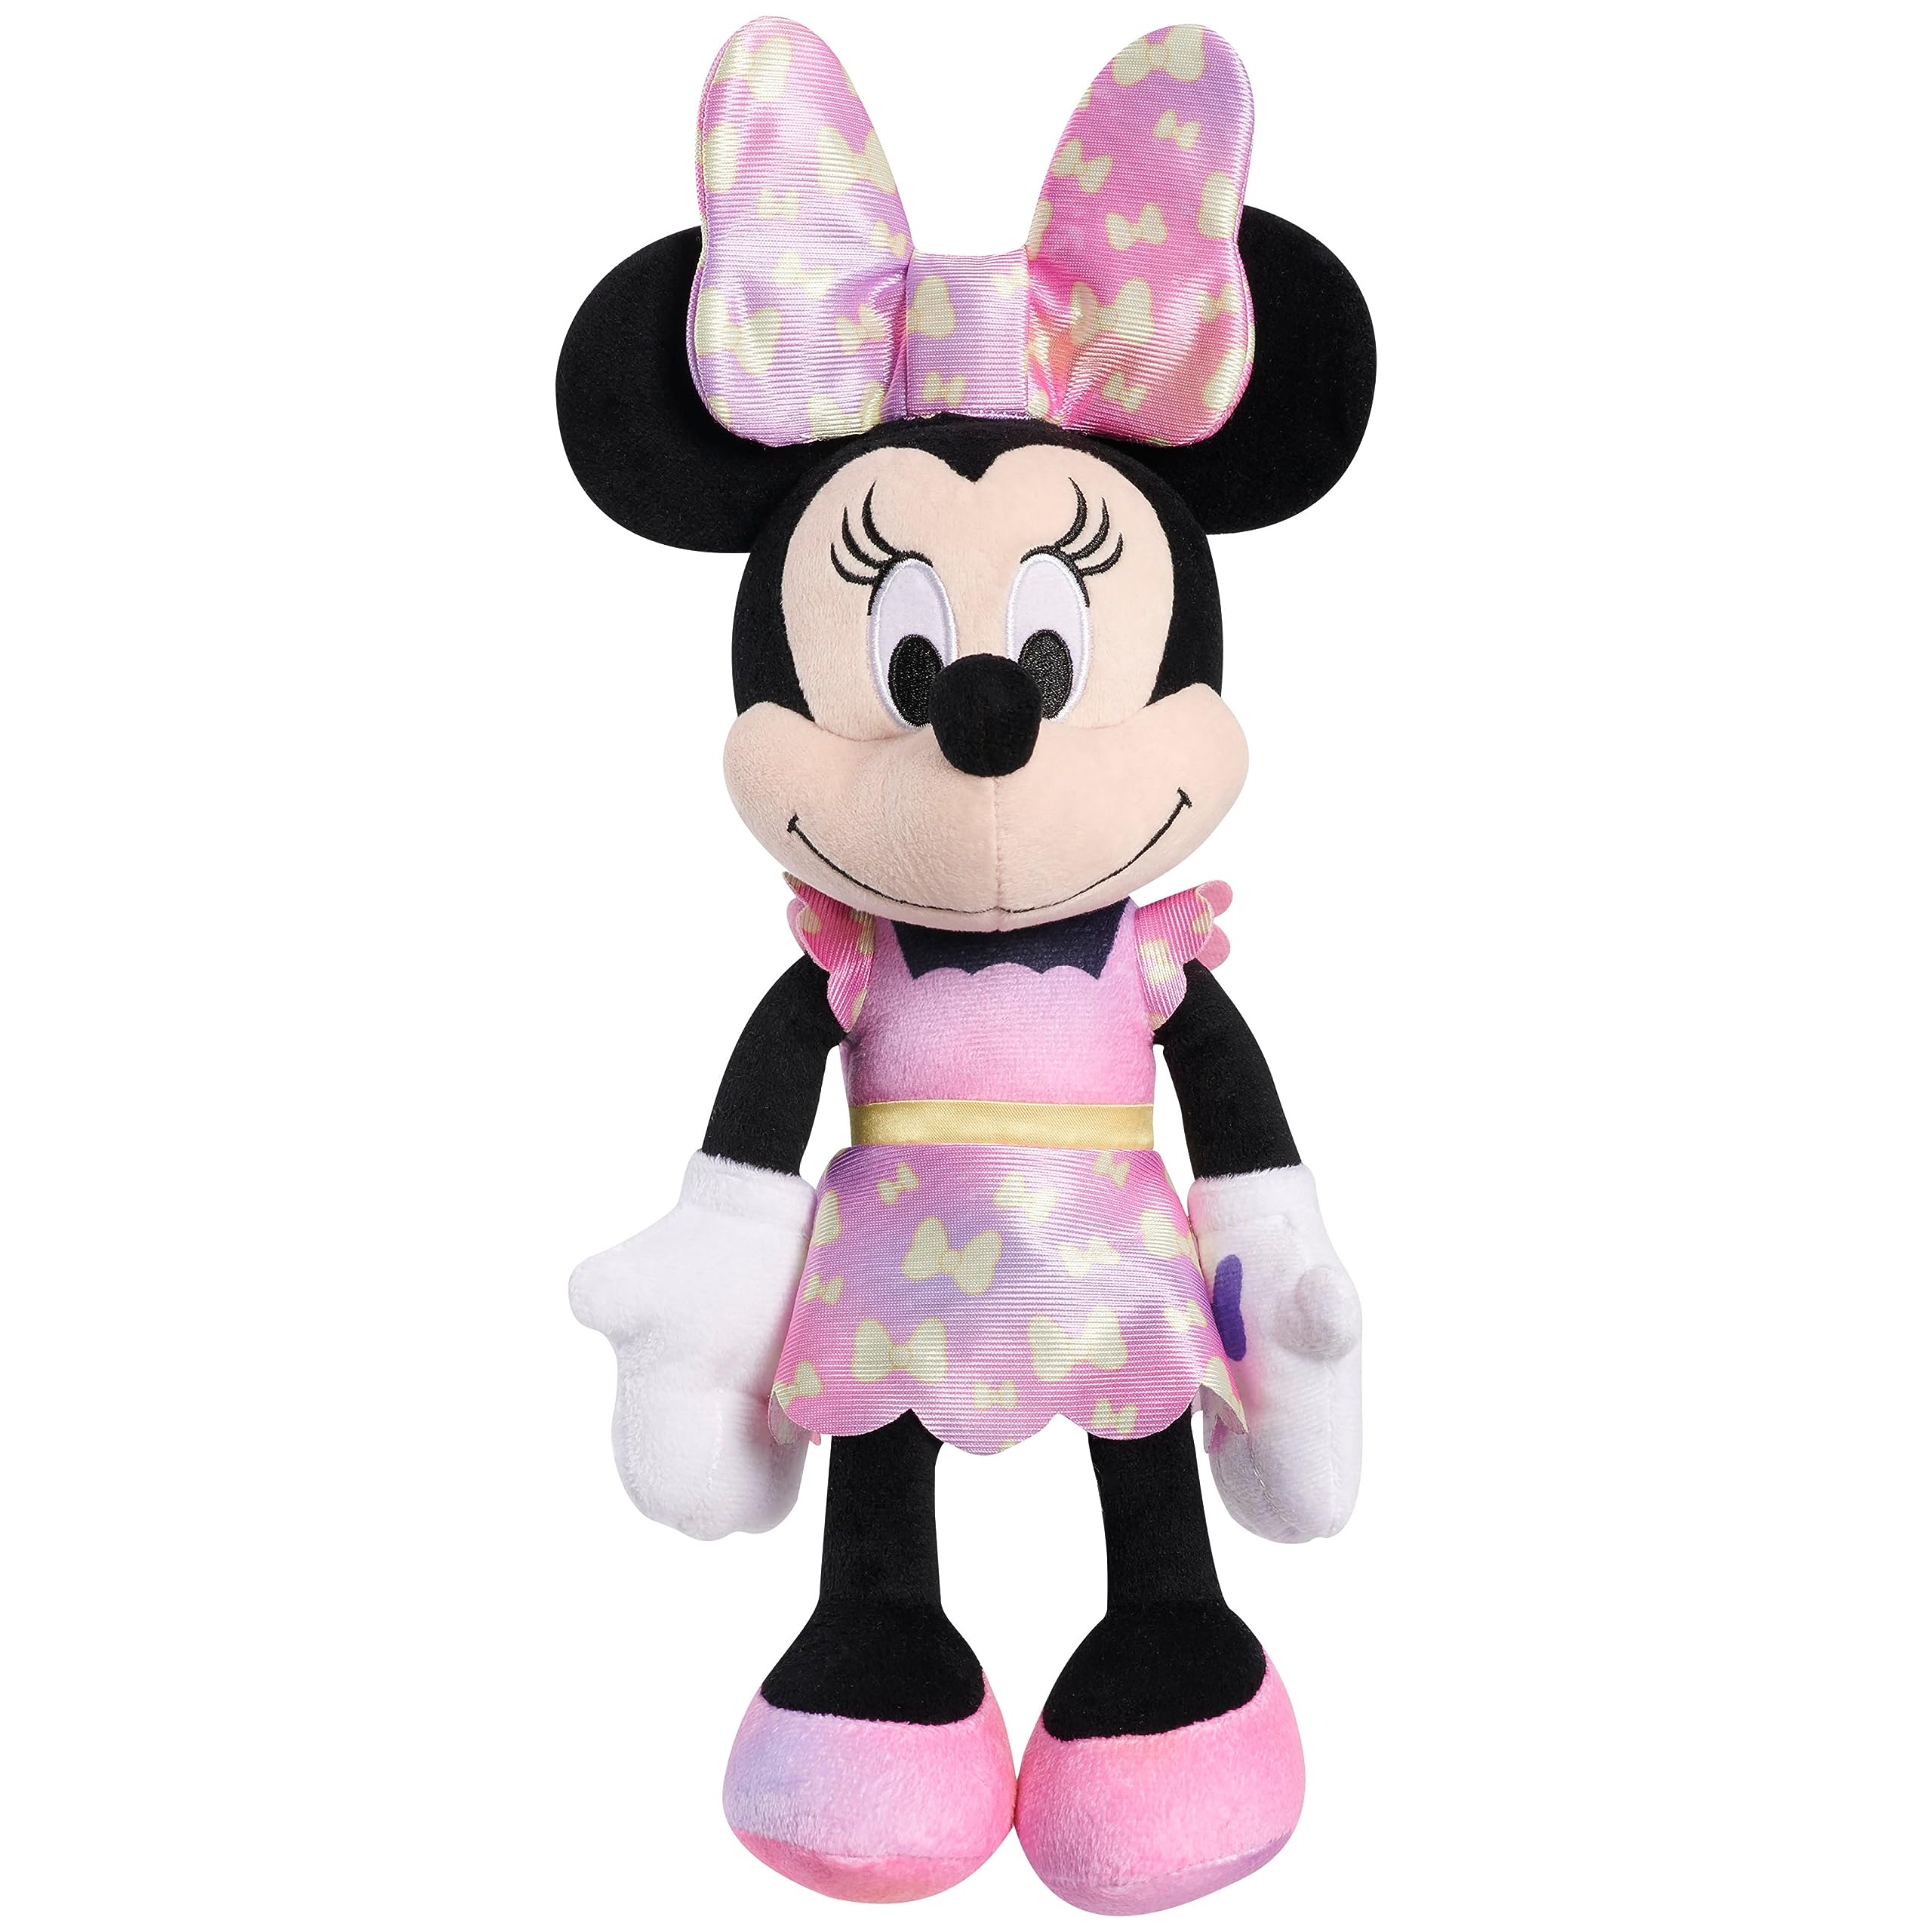 Disney Junior Minnie Mouse Fashion Bow Plush Stuffed Animal, Officially Licensed Kids Toys for Ages 3 Up by Just Play